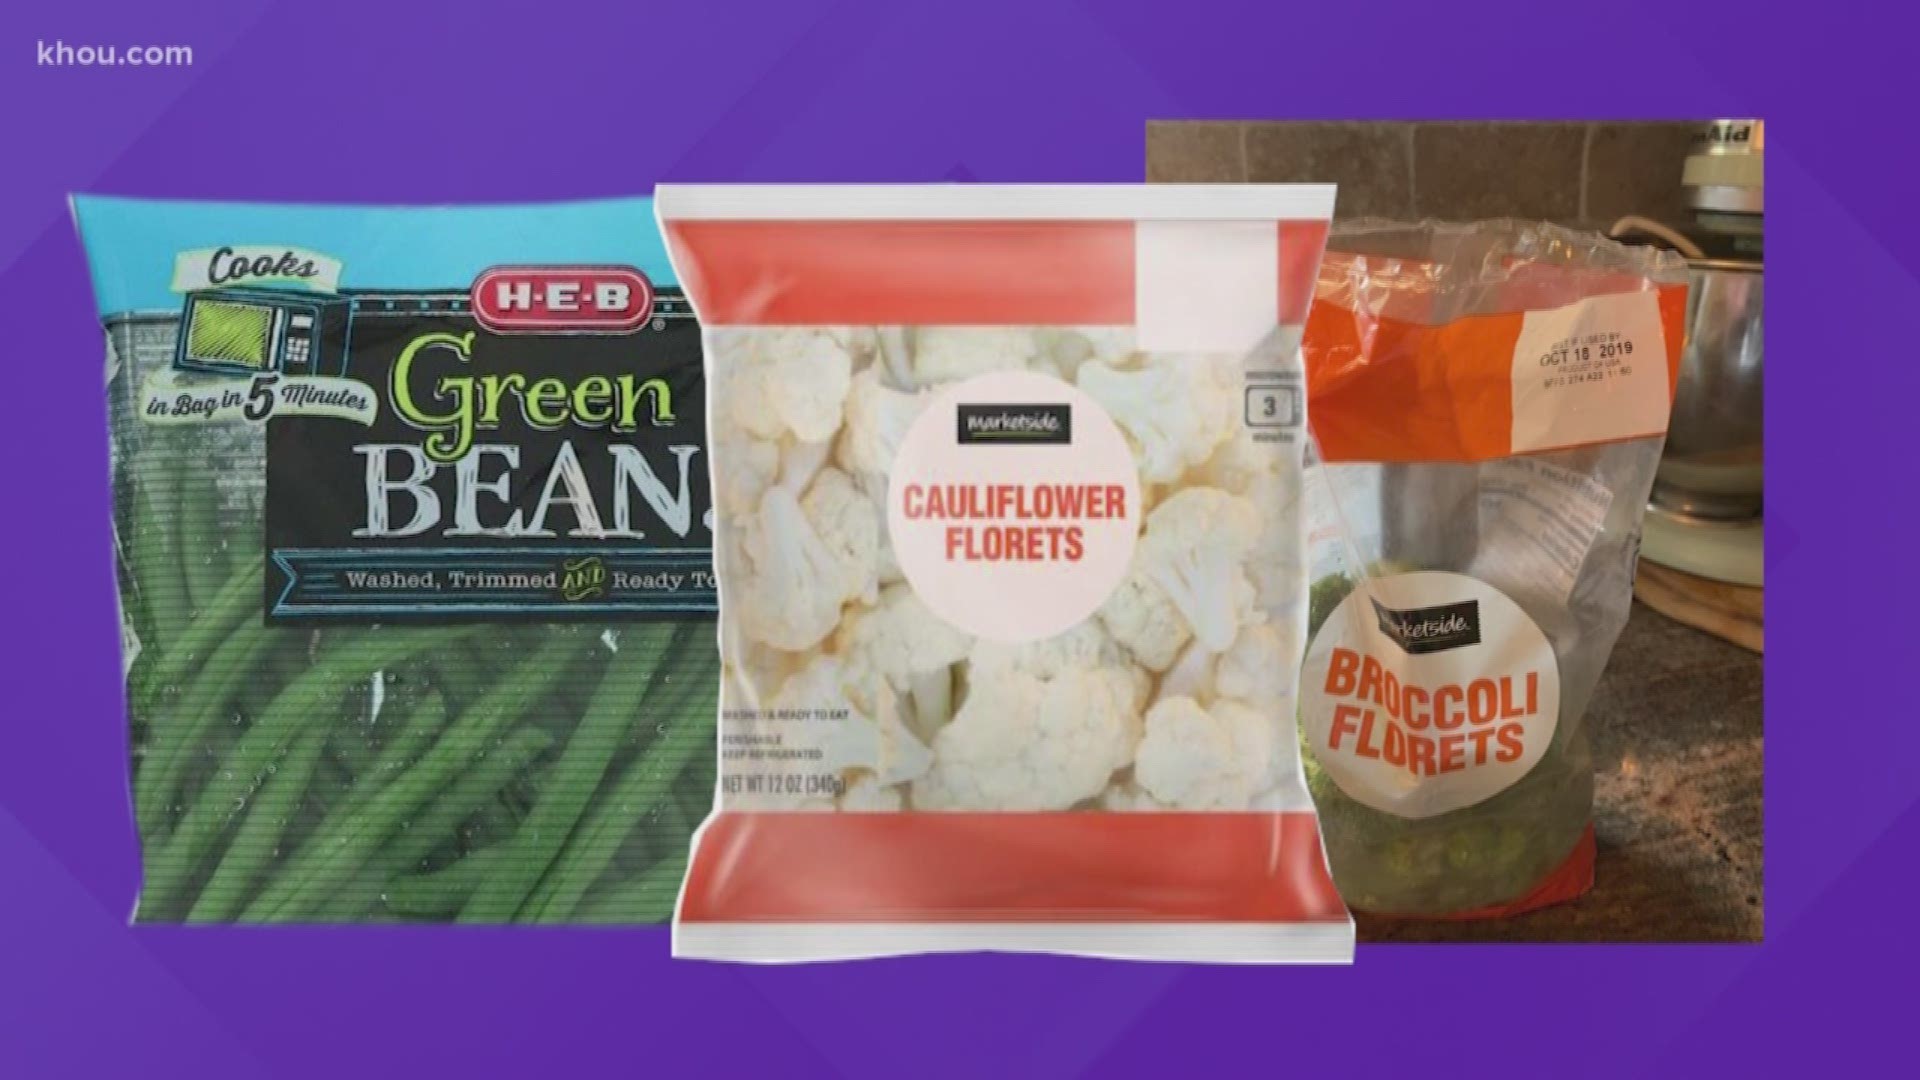 More than 100 vegetable products sold under nearly a dozen different brand names have been recalled because they could be contaminated with Listeria.